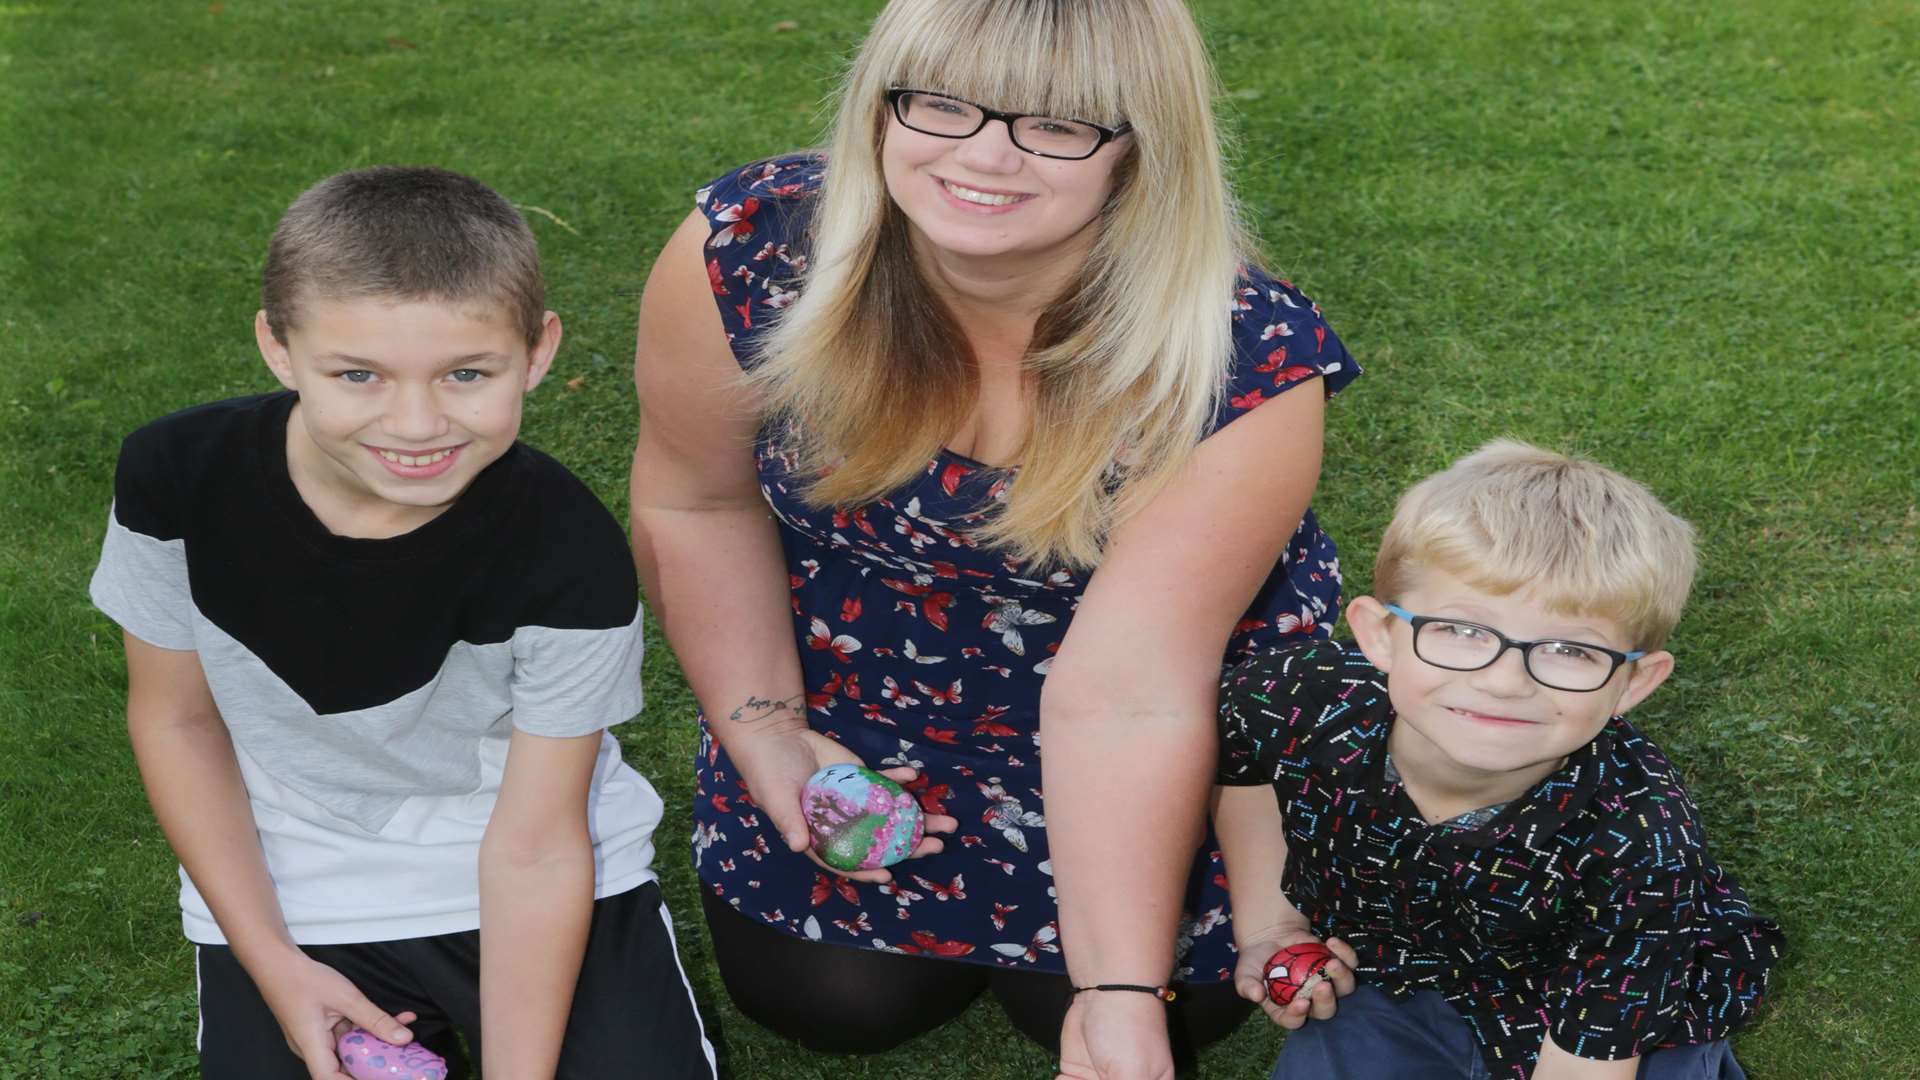 The family are hoping to make strangers smile in Sittingbourne